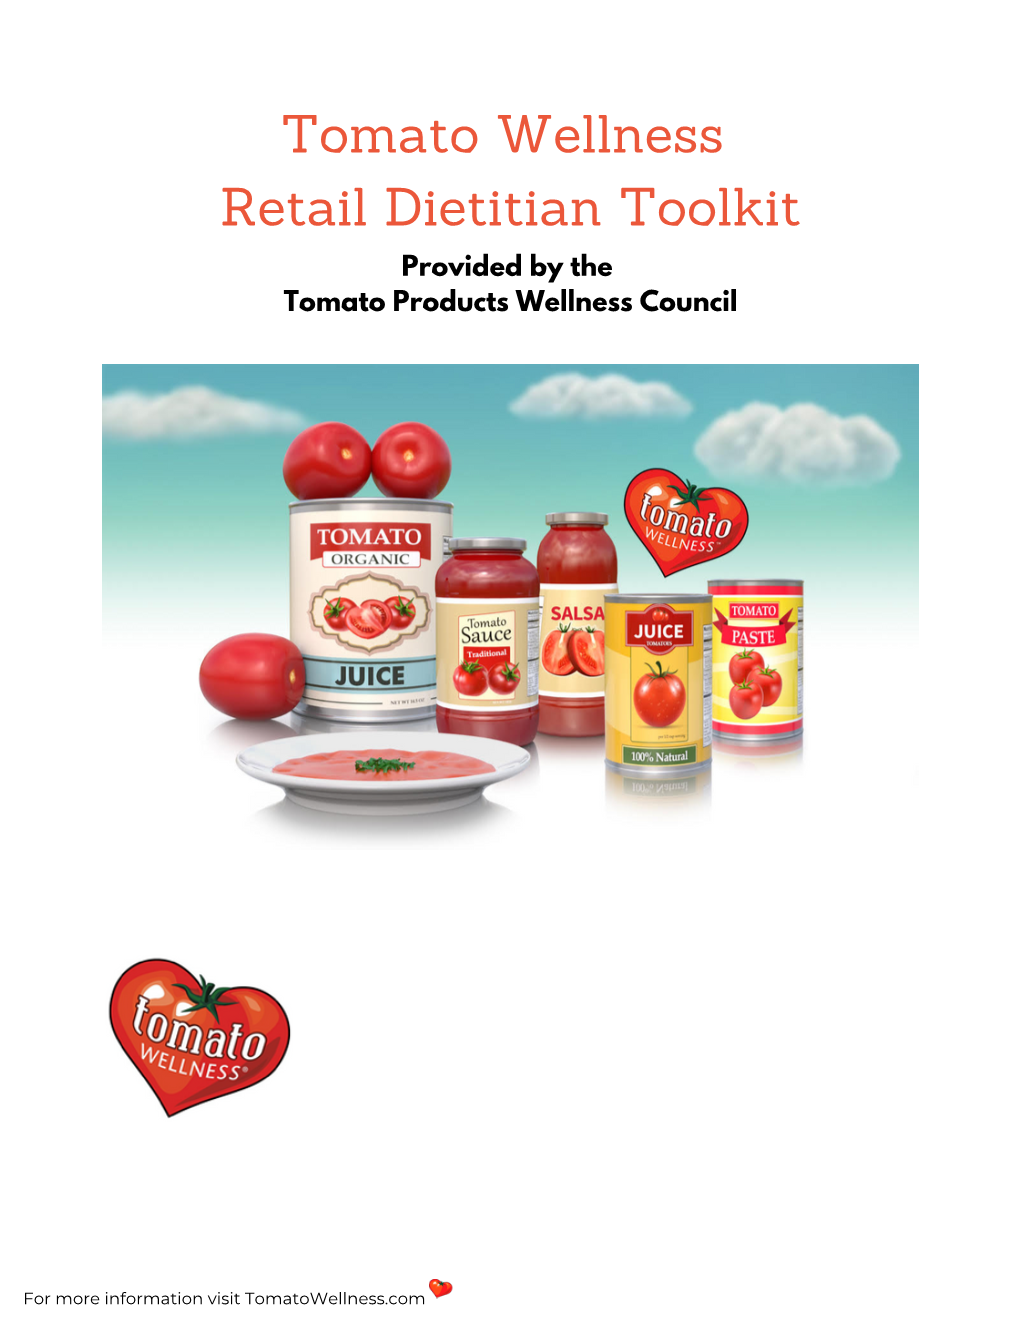 Tomato Wellness Retail Dietitian Toolkit Provided by the Tomato Products Wellness Council